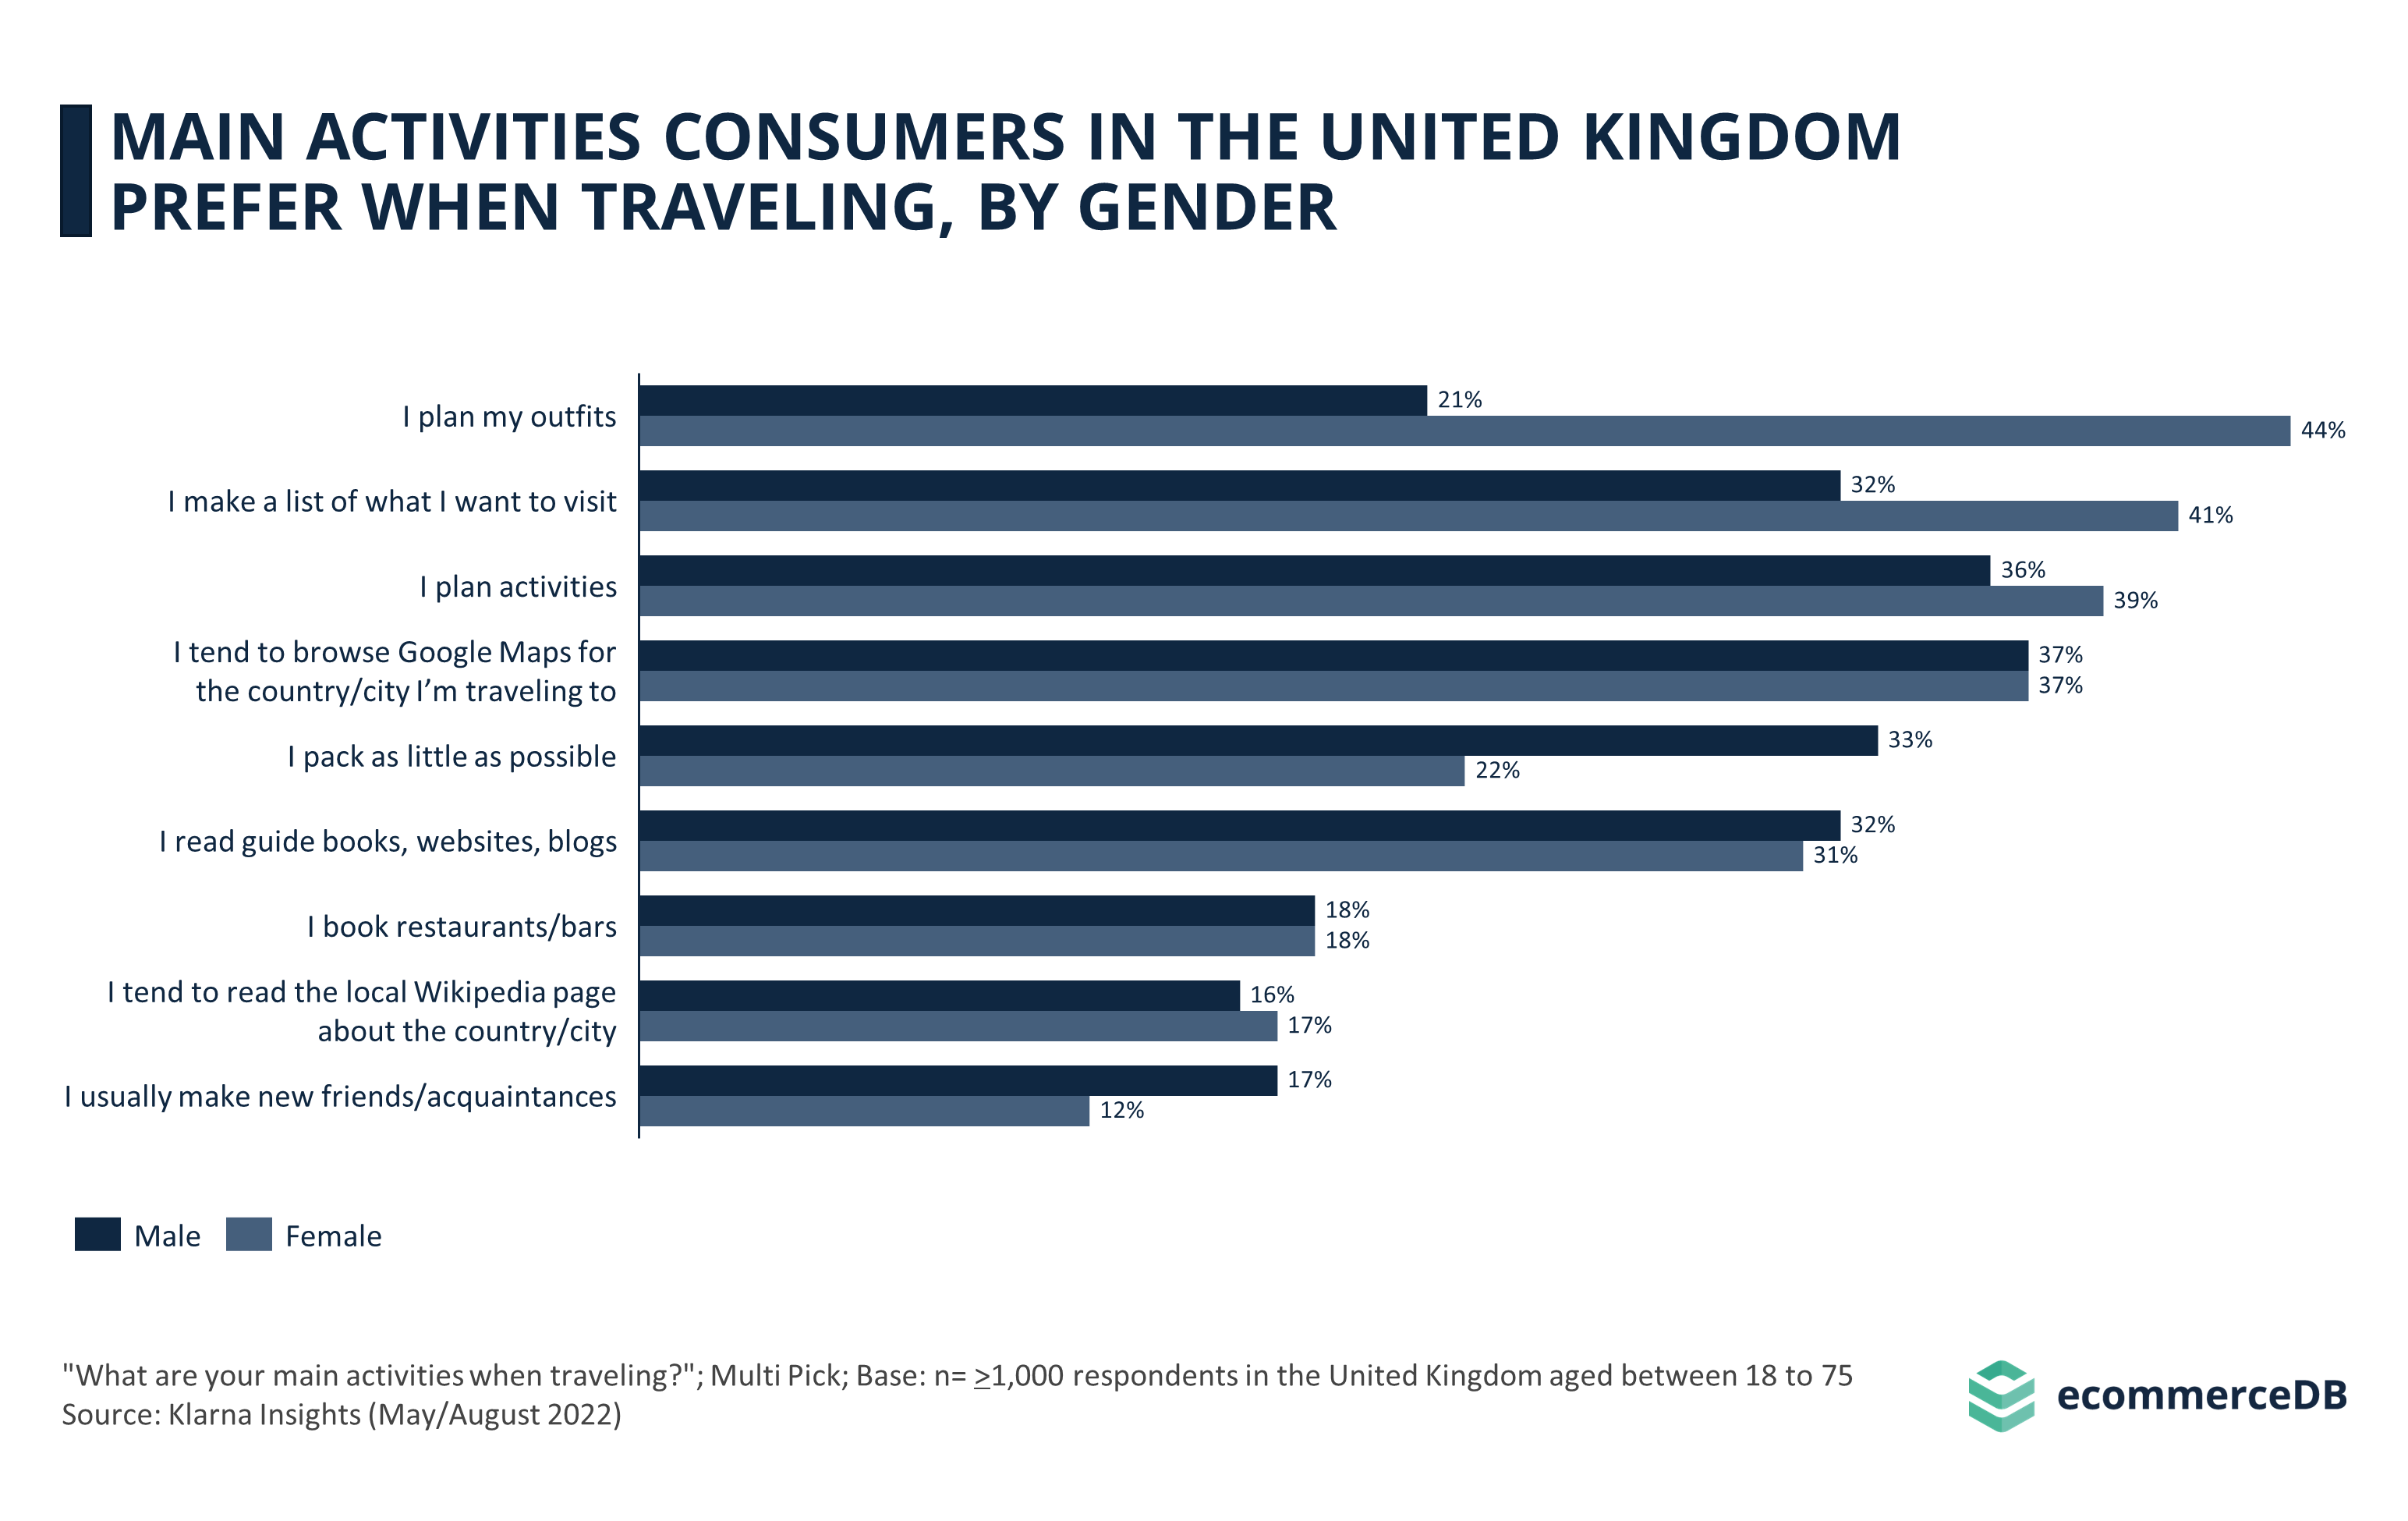 Main Activities Consumers in the United Kingdom Prefer When Traveling, by Gender